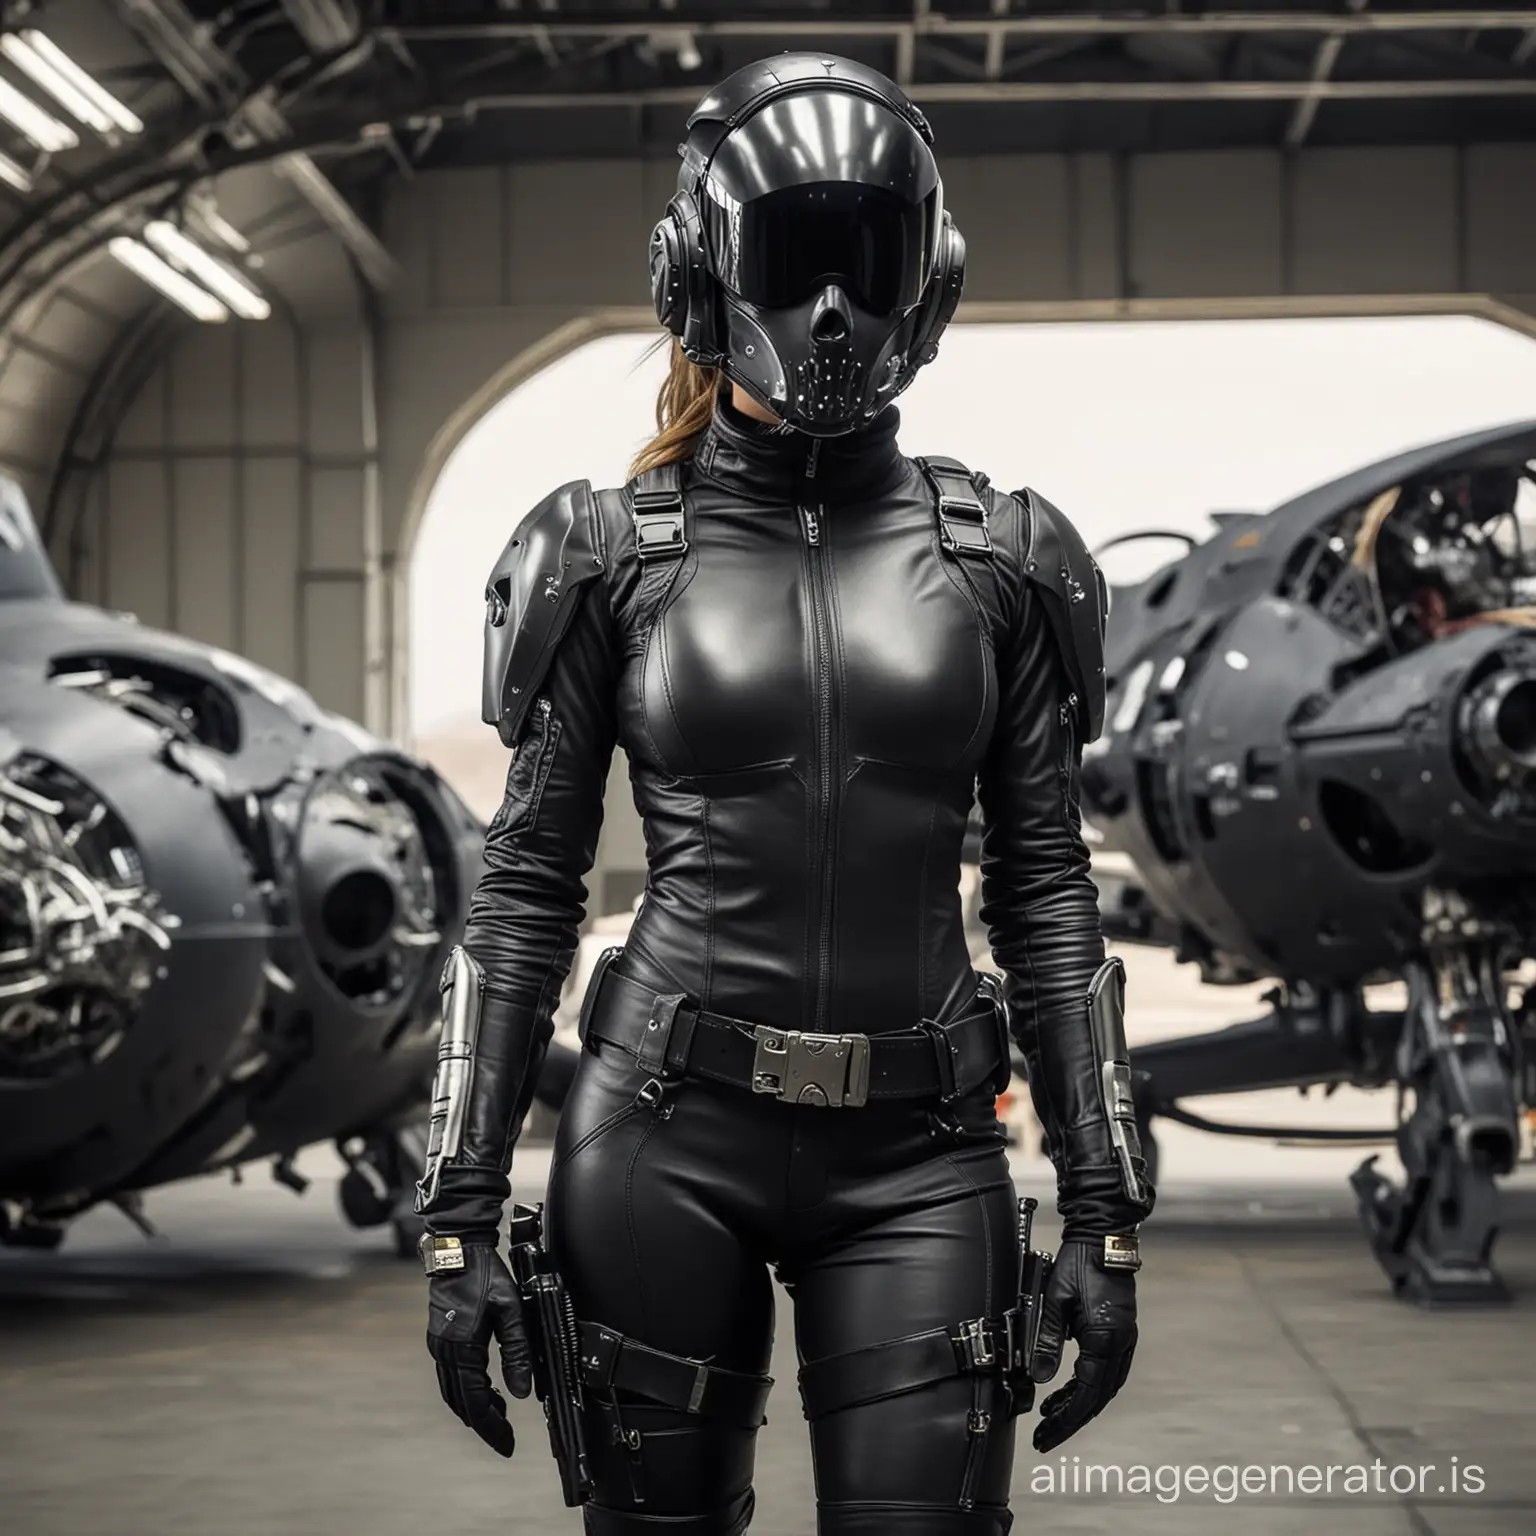 an object that looks like a woman bounty hunter wearing an open tight black flight suit that is open at the chest with a skull helmet and tactical gear with a singular spacecraft in background